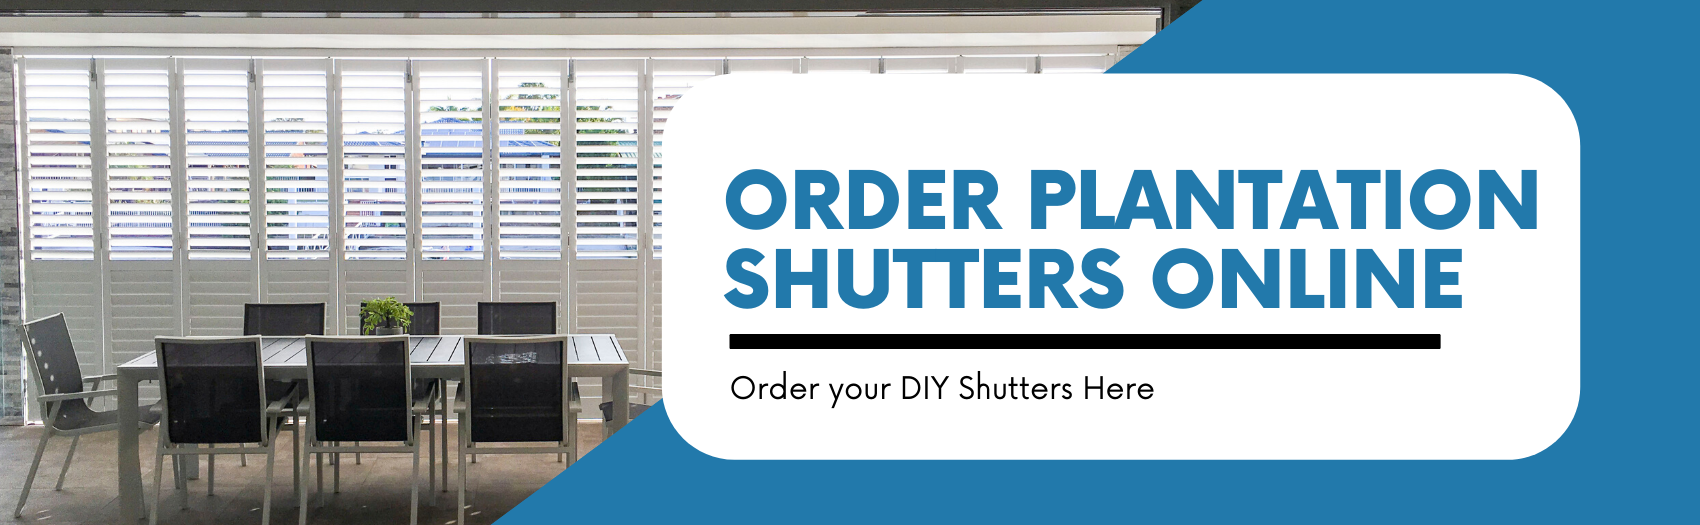 order shutters online image of external dining area shutters